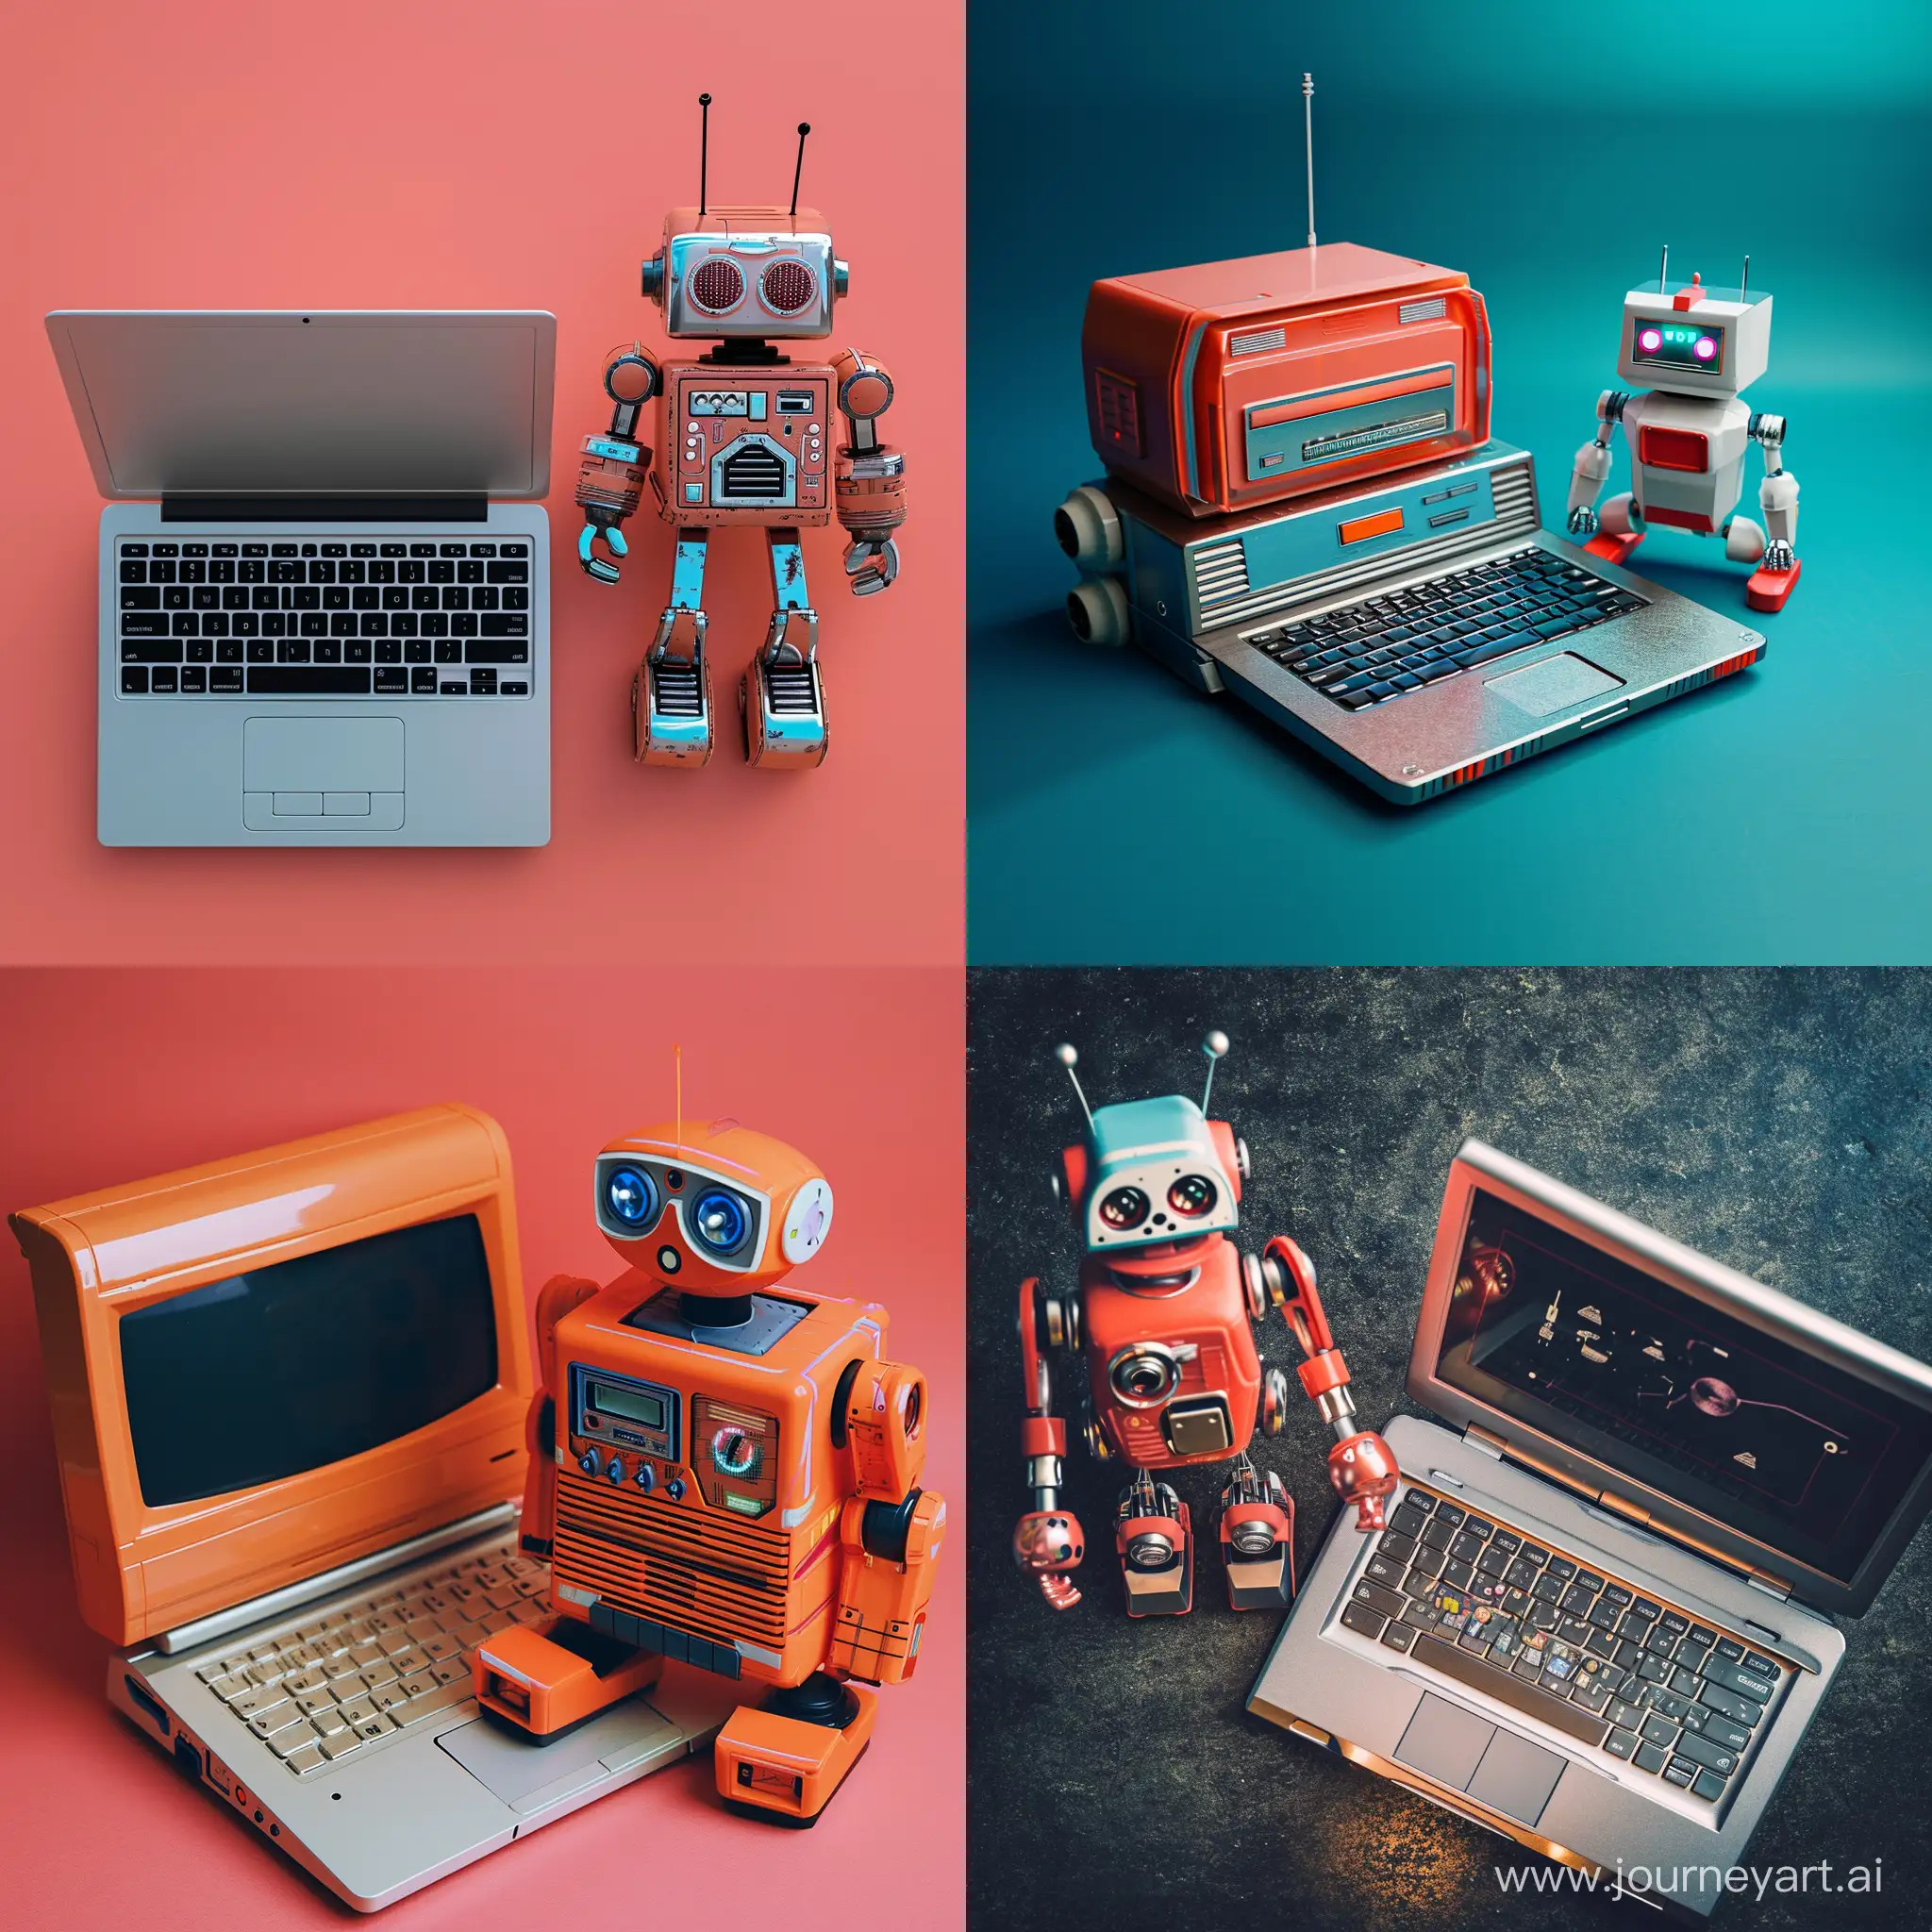 Retro-Futuristic-Laptop-and-Cute-Robot-1970sInspired-Top-View